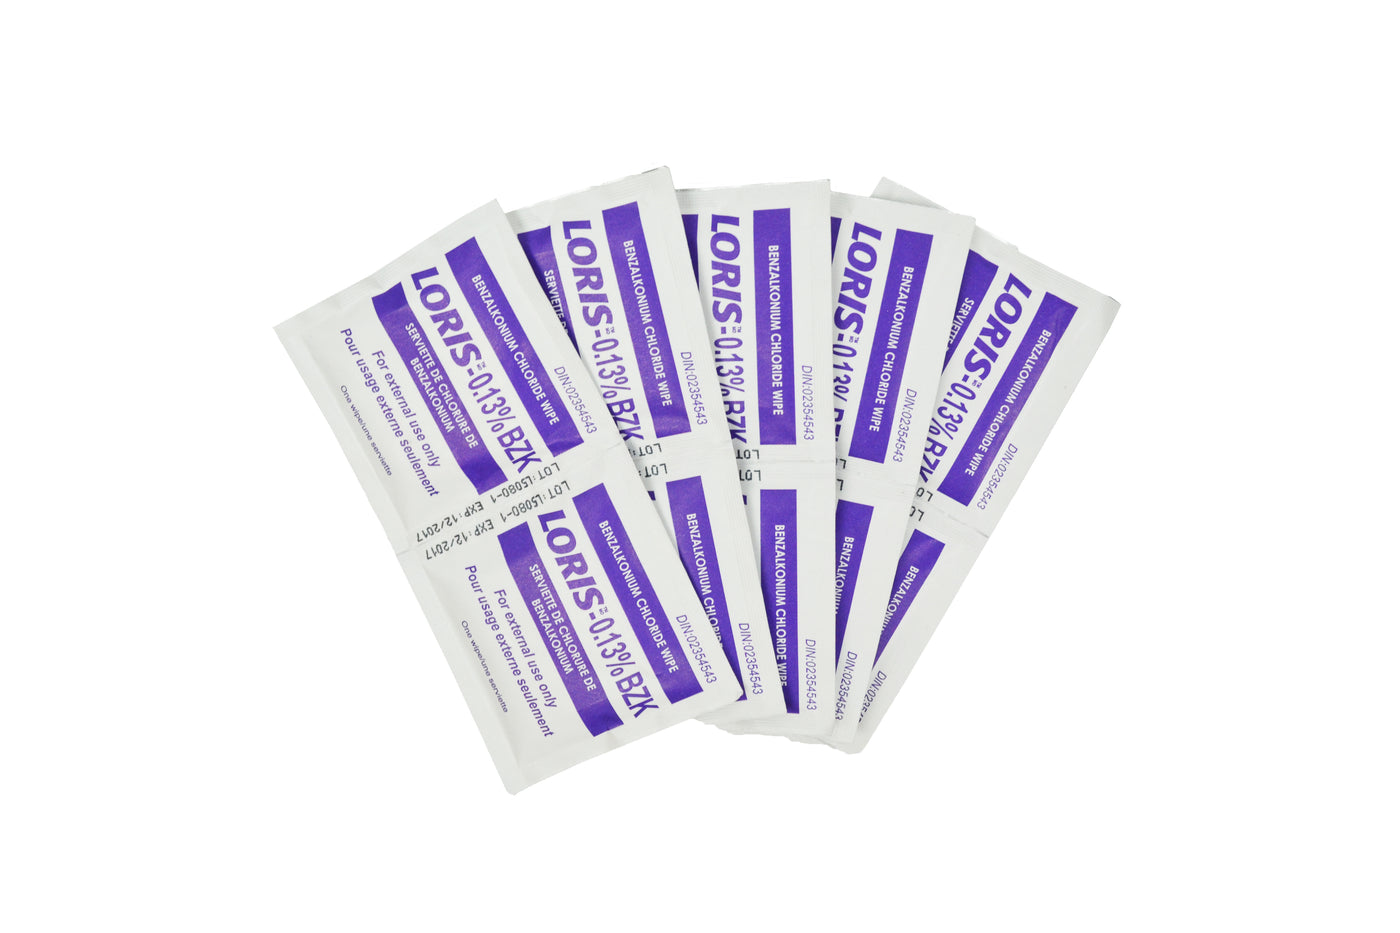 Wound Cleansing Towelettes (Minimum order of 10)